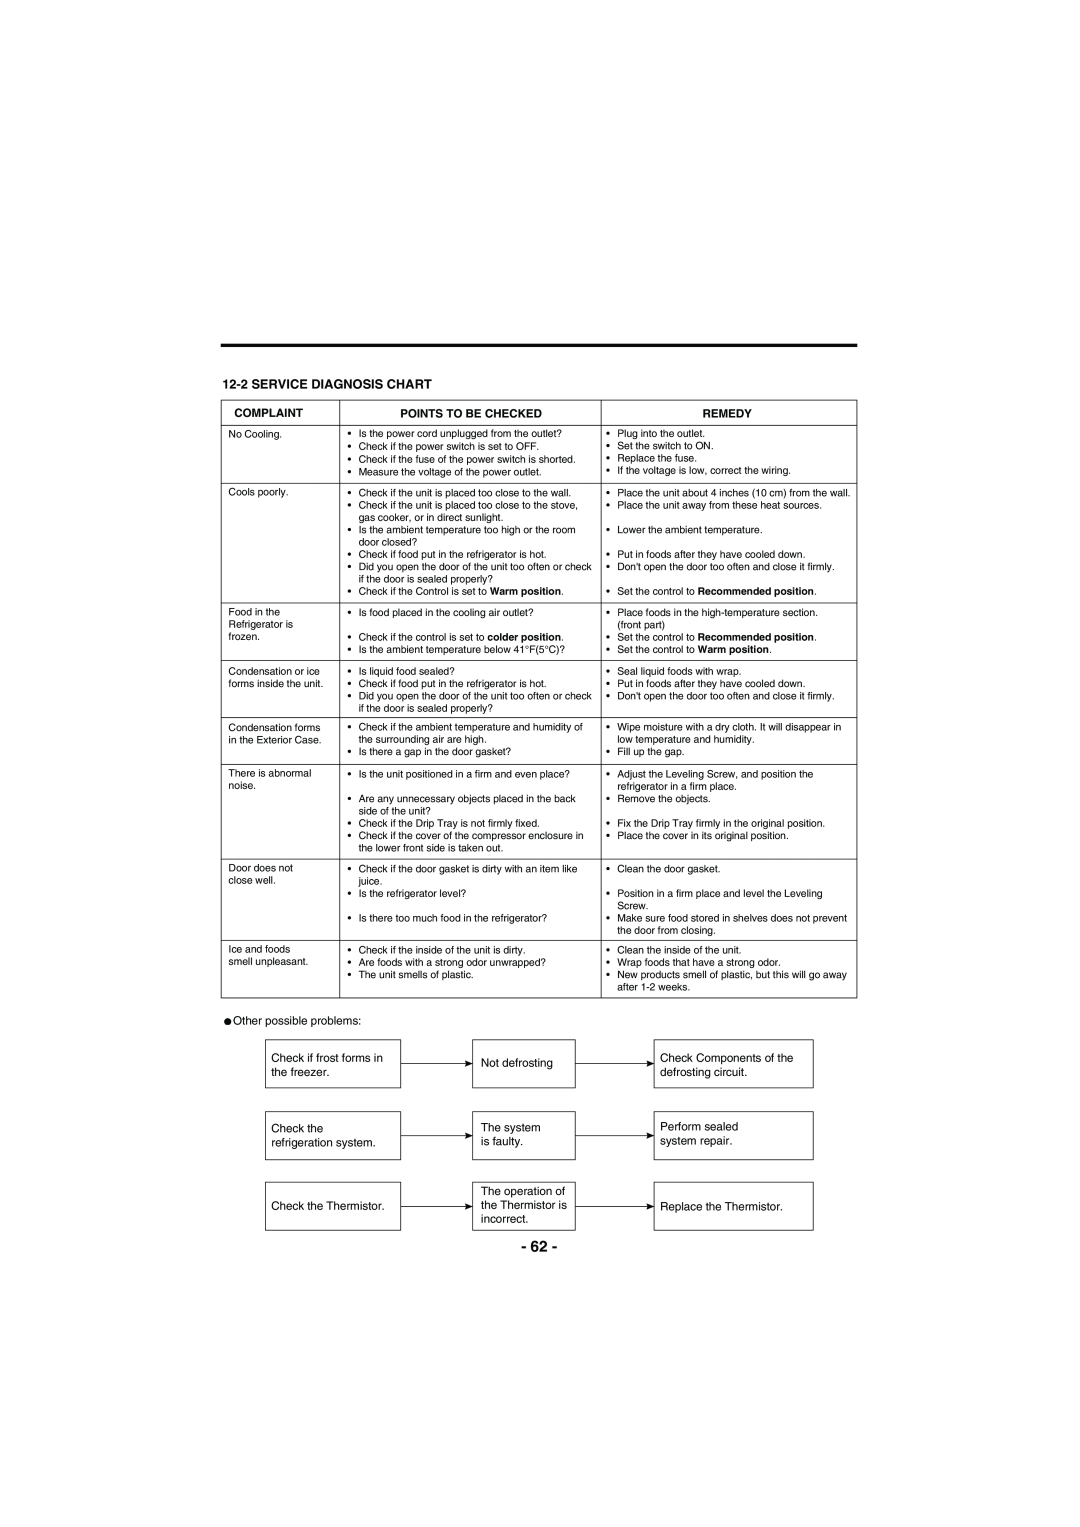 Kenmore 795-71022.010 service manual Service Diagnosis Chart, Complaint, Points To Be Checked, Remedy 